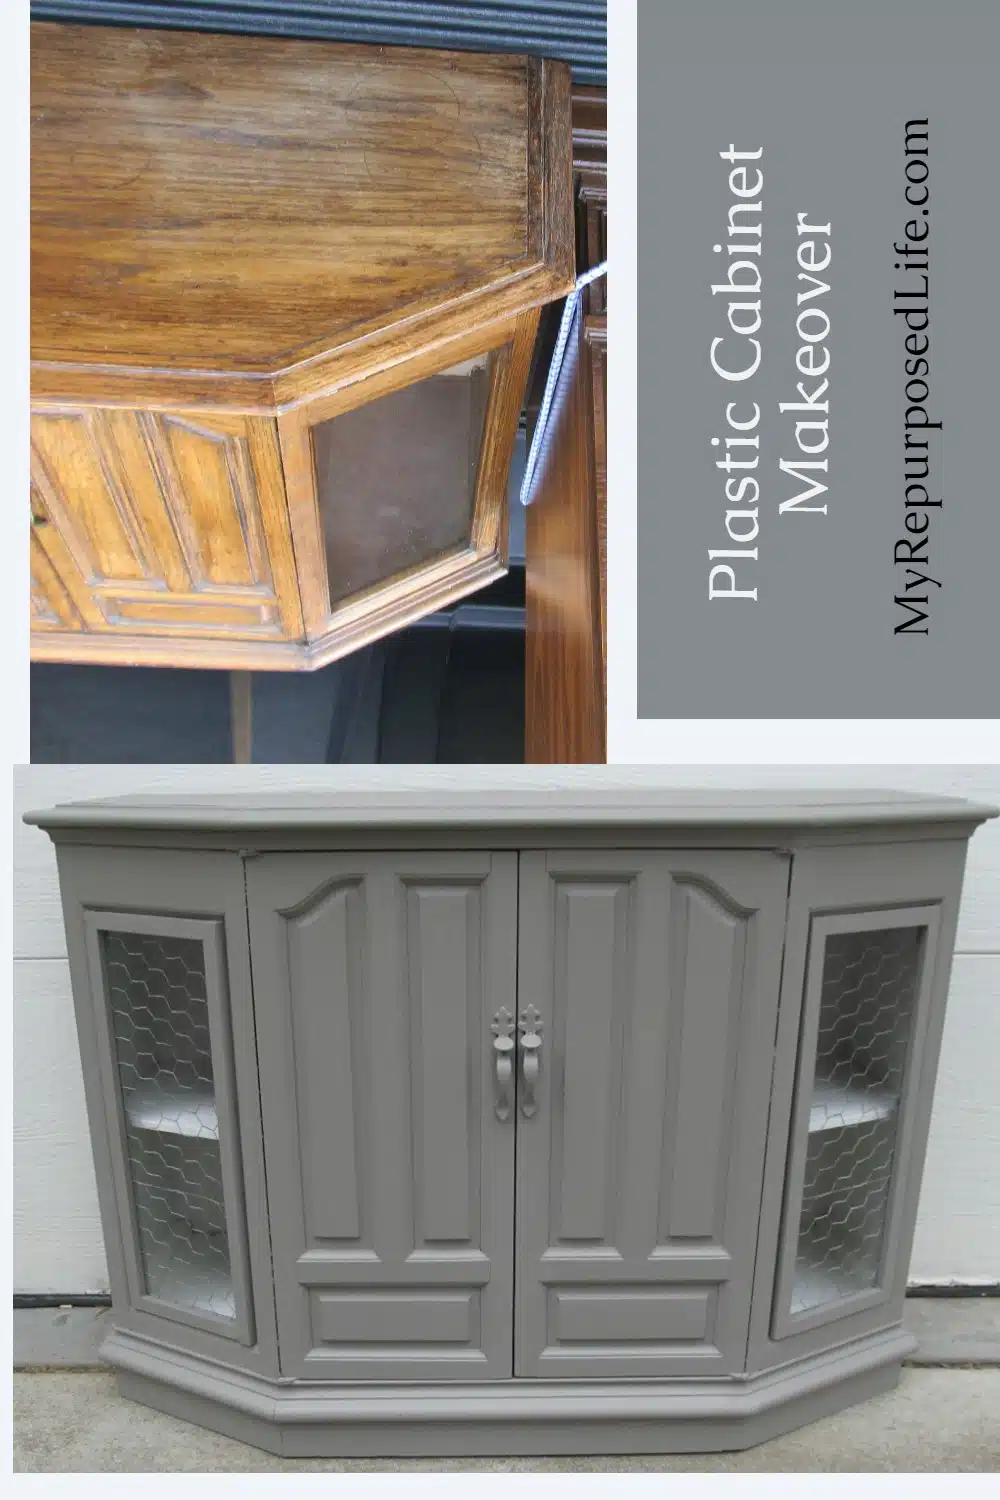 You won't believe this awesome plastic cabinet makeover. Maybe you call it a console? It's one of those plastic pieces made to look like wood. #MyRepurposedLife #repurposed #furniture #makeover #plastic #cabinet #painted #furniture via @repurposedlife